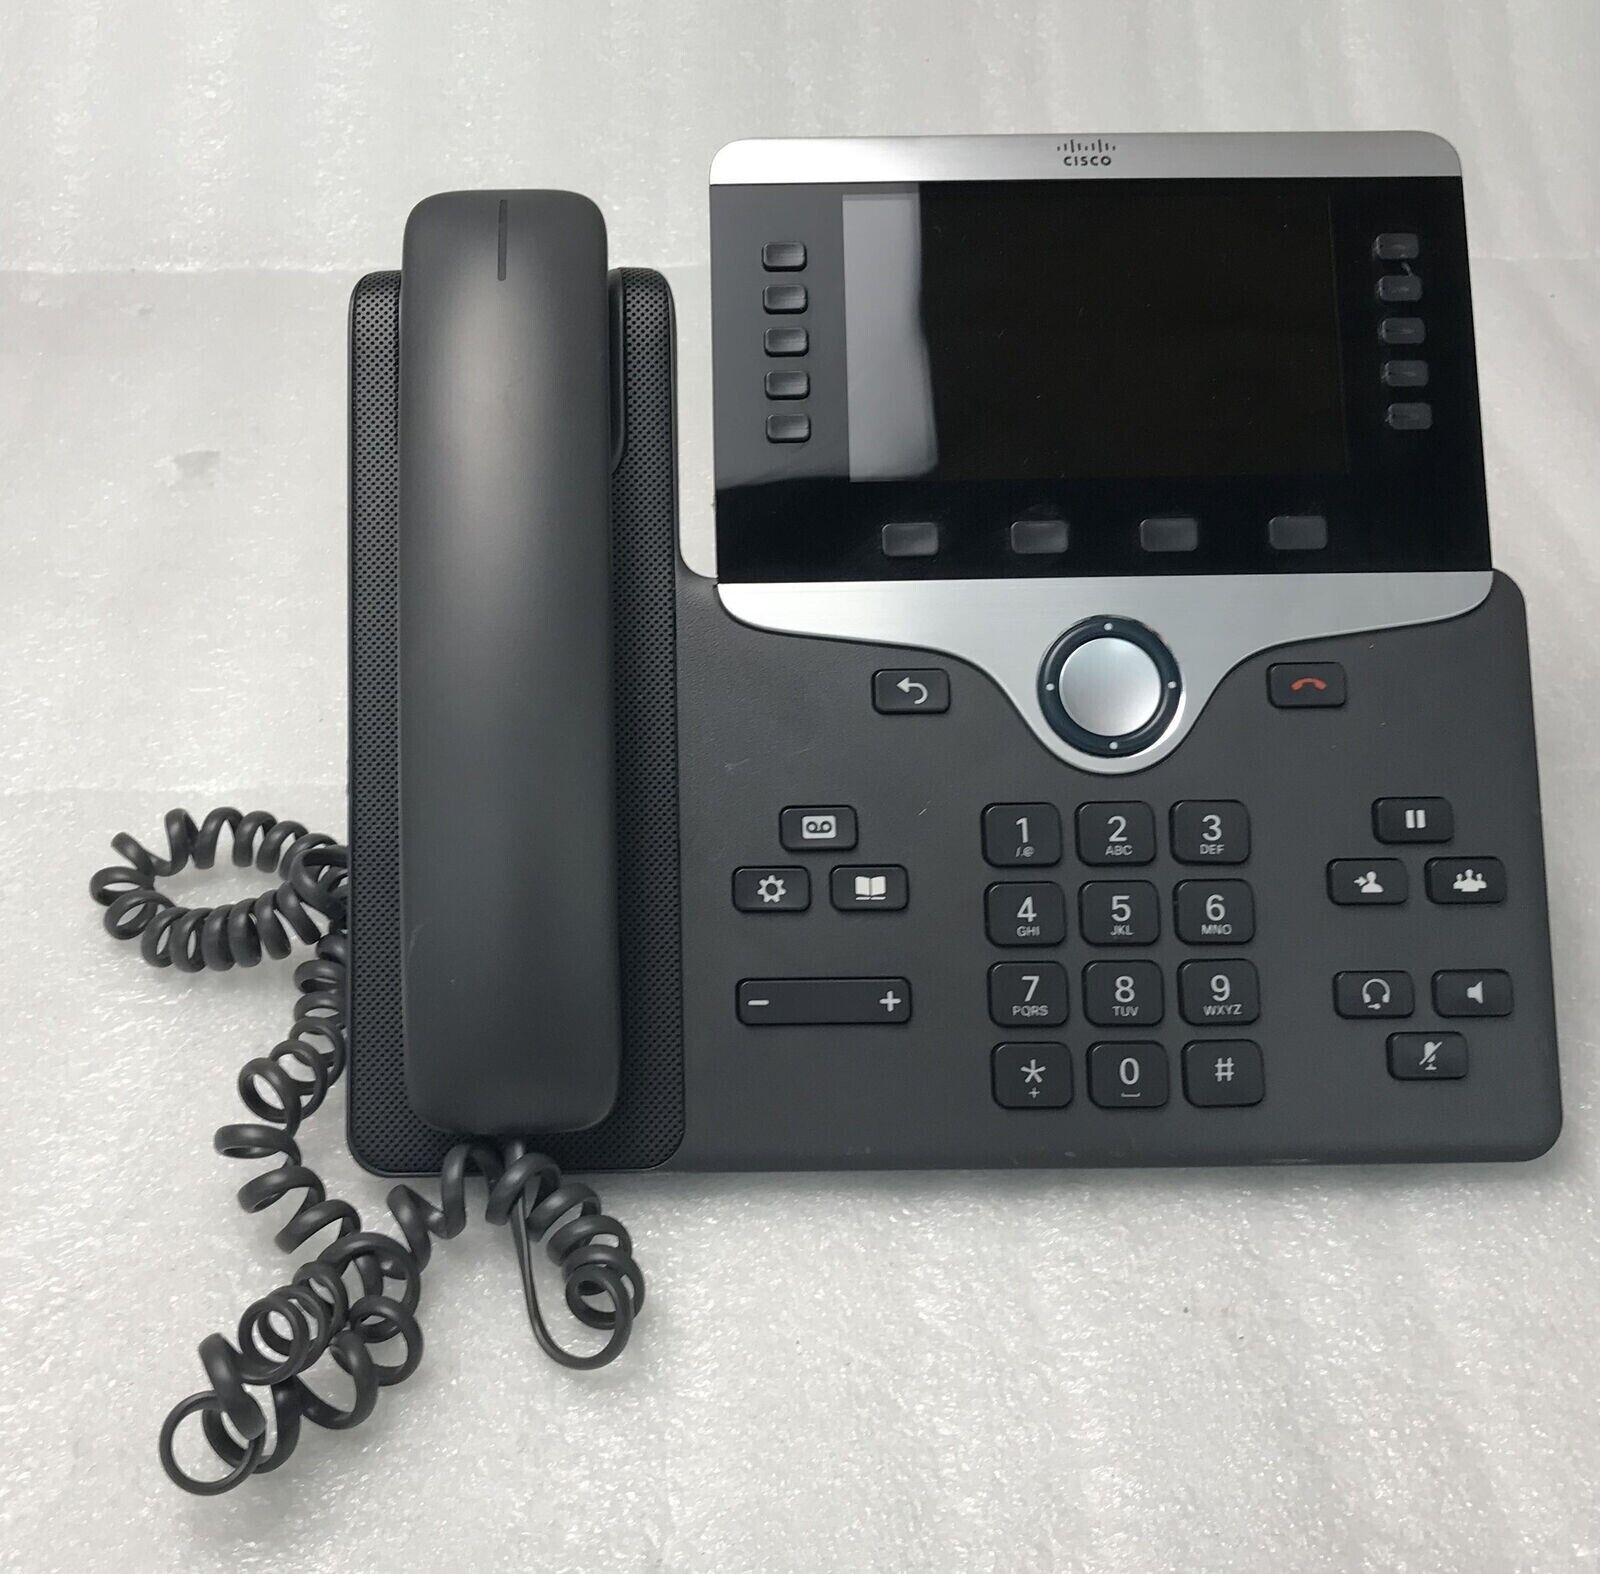 Cisco 8851 CP-8851 CP-8851-K9 V11 IP Office Phone w/ Cord, Handset & Stand